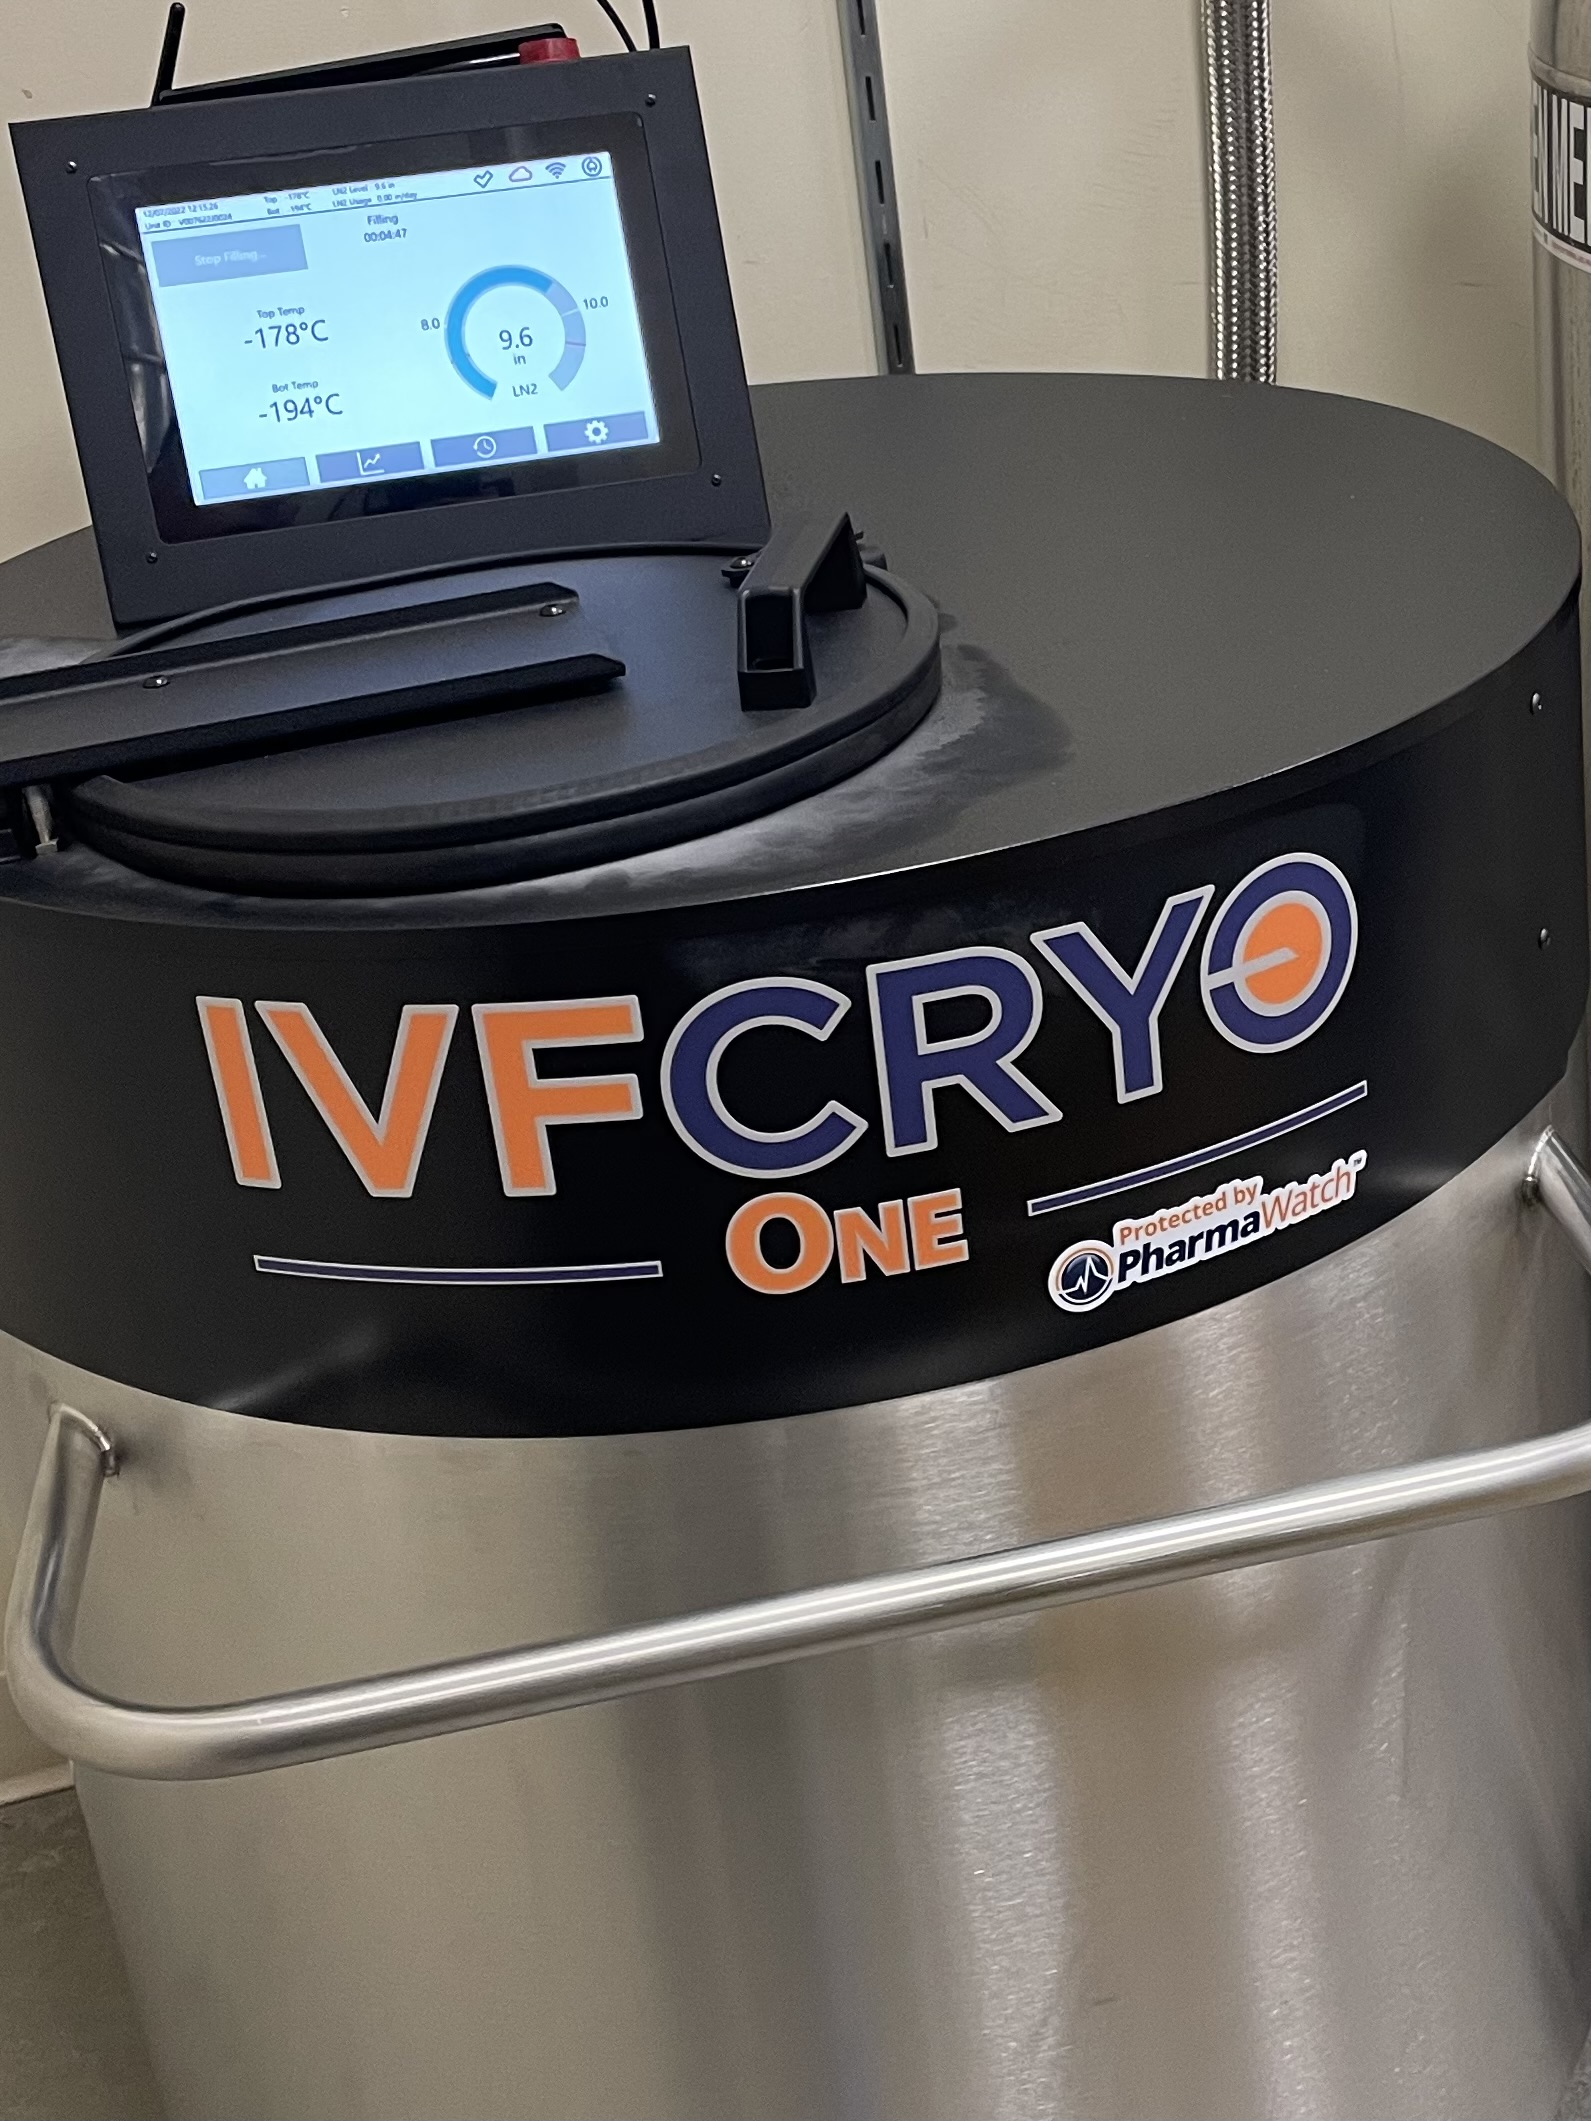 IVFCRYO-One Comes to Denver!